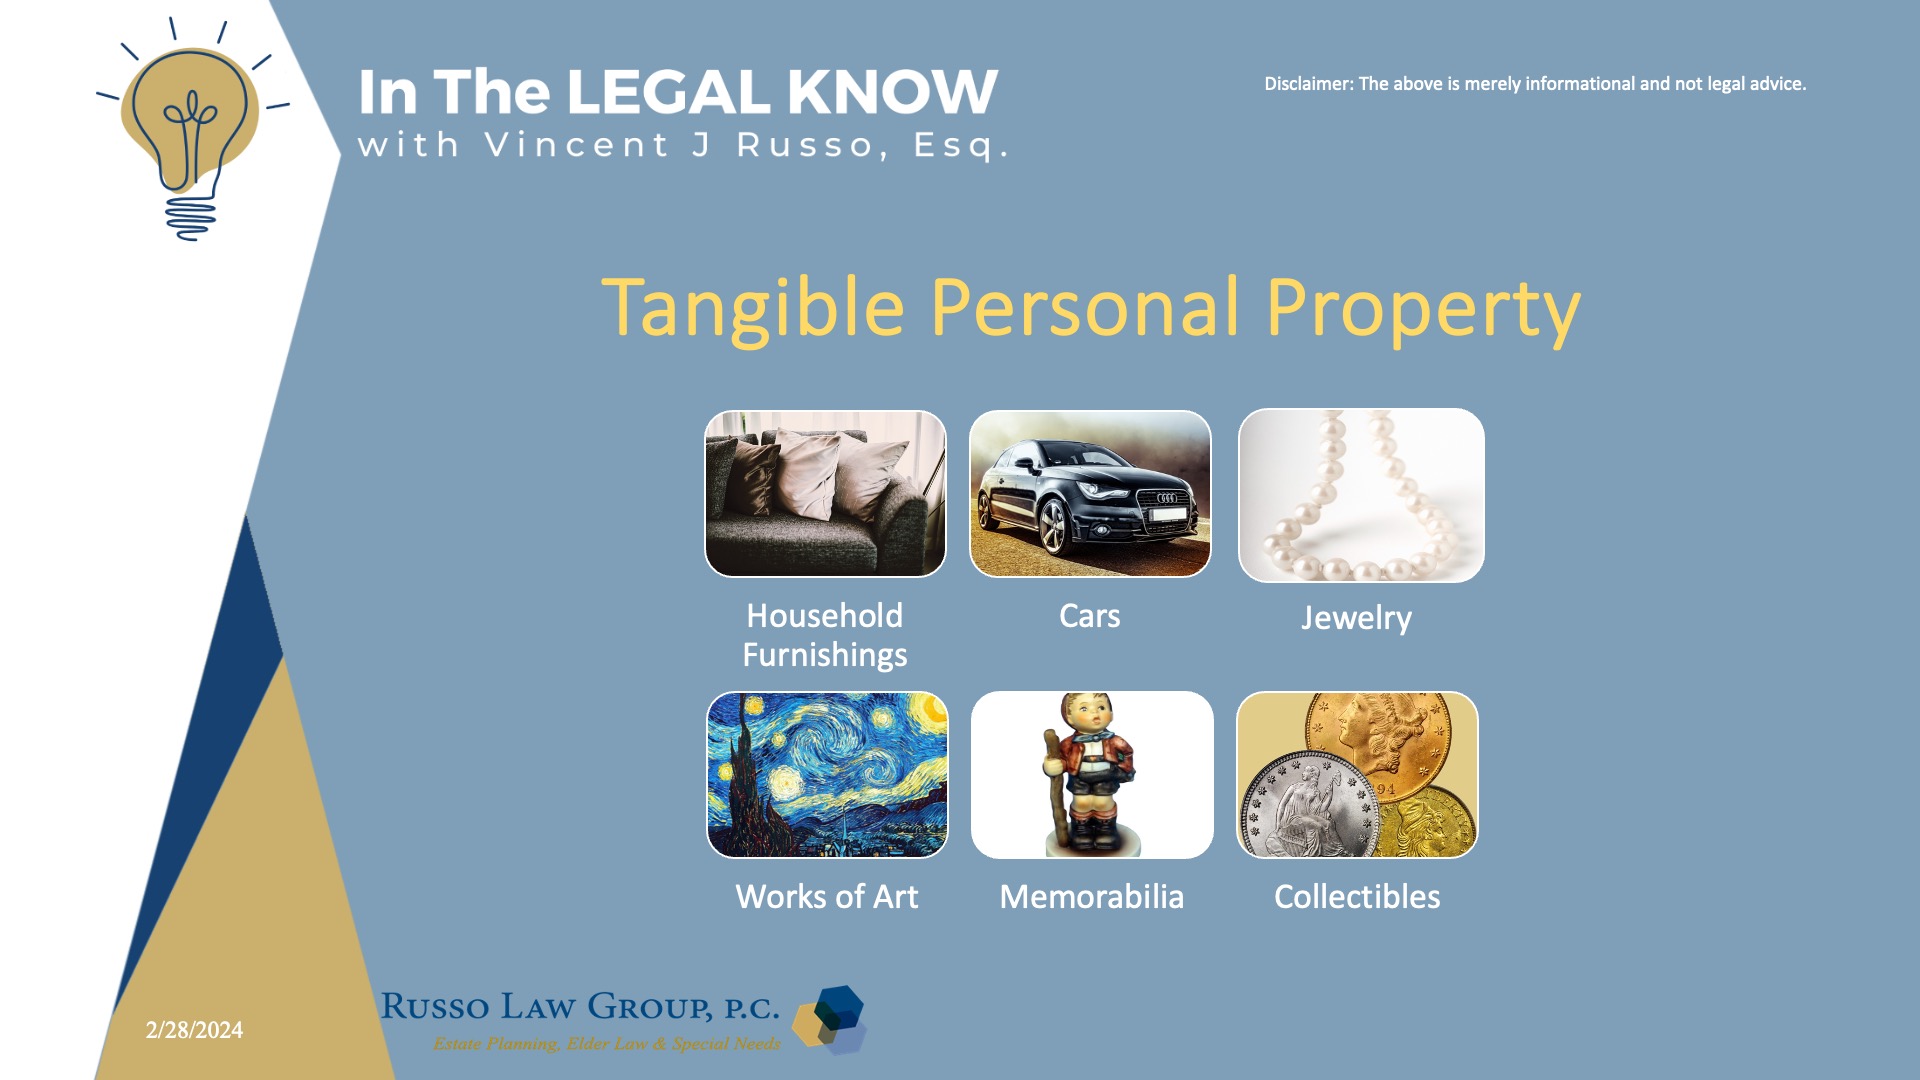 Tangible Personal Property